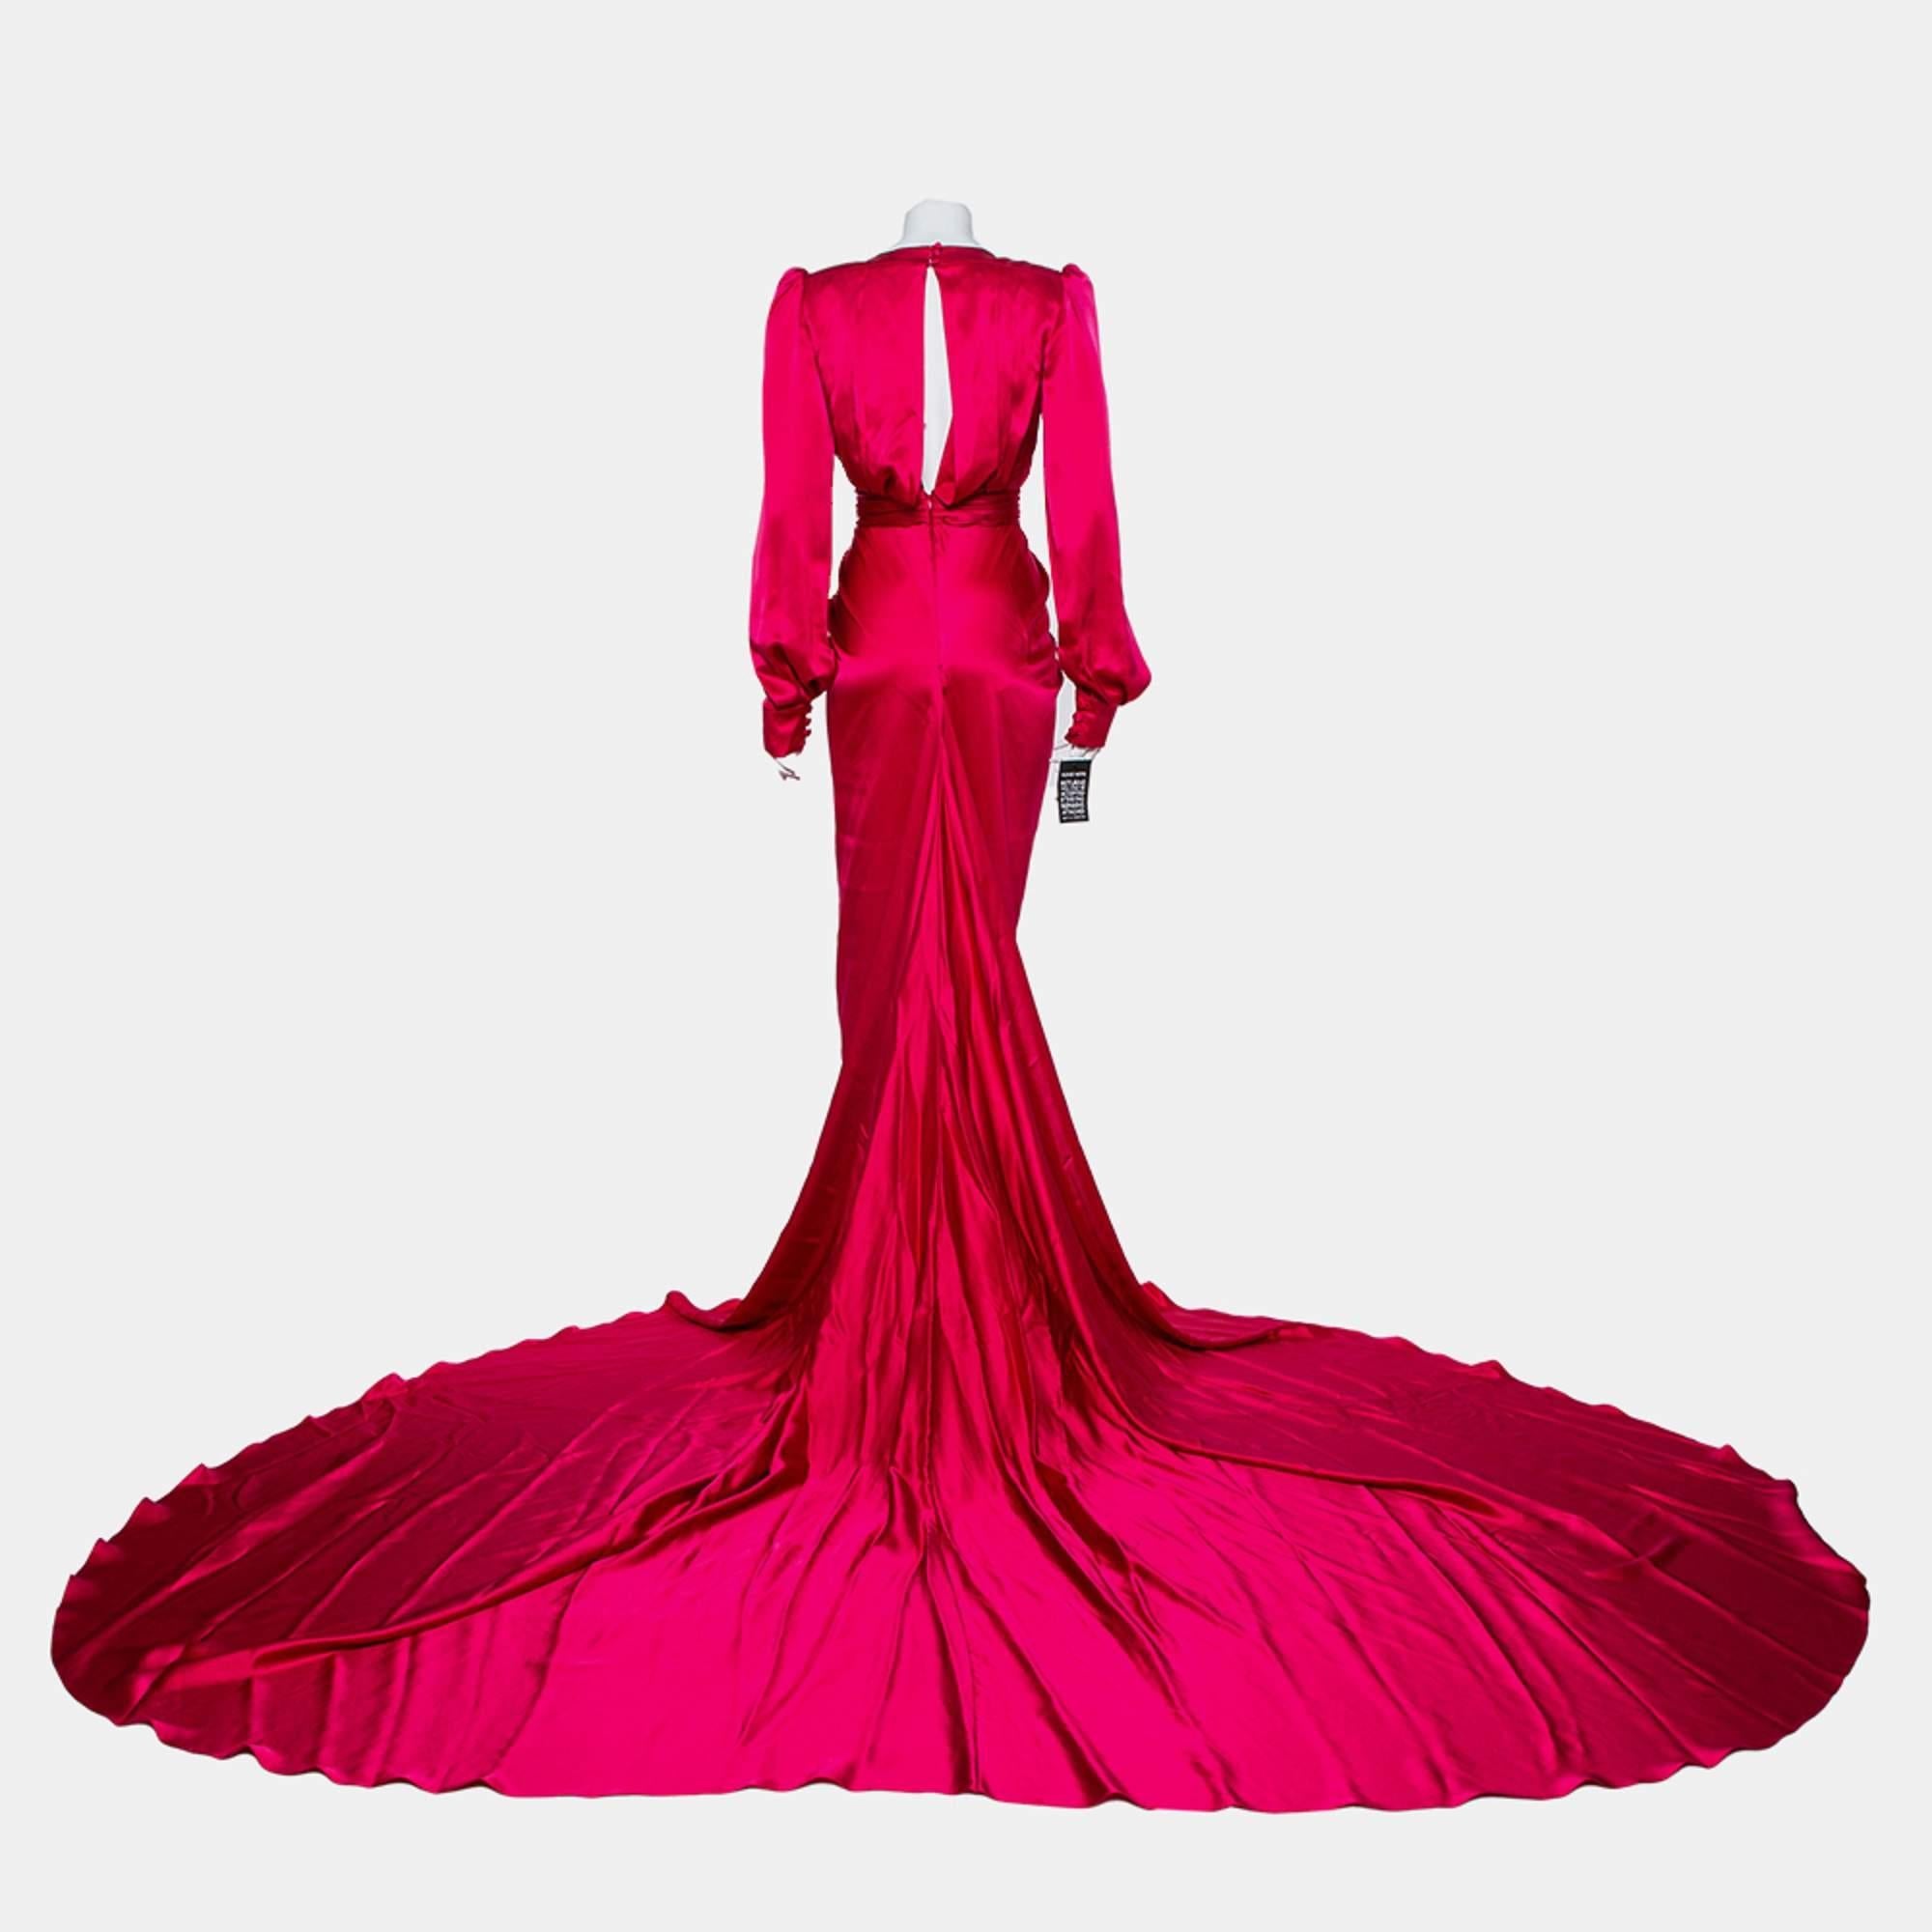 Create the most stunning red carpet looks wearing this gorgeous Ong-Oaj Pairam Angelica gown that is fit for a diva. Constructed in Fuschia pink satin fabric, this gown features a pleated silhouette with waist belt detailing, a plunging neckline,